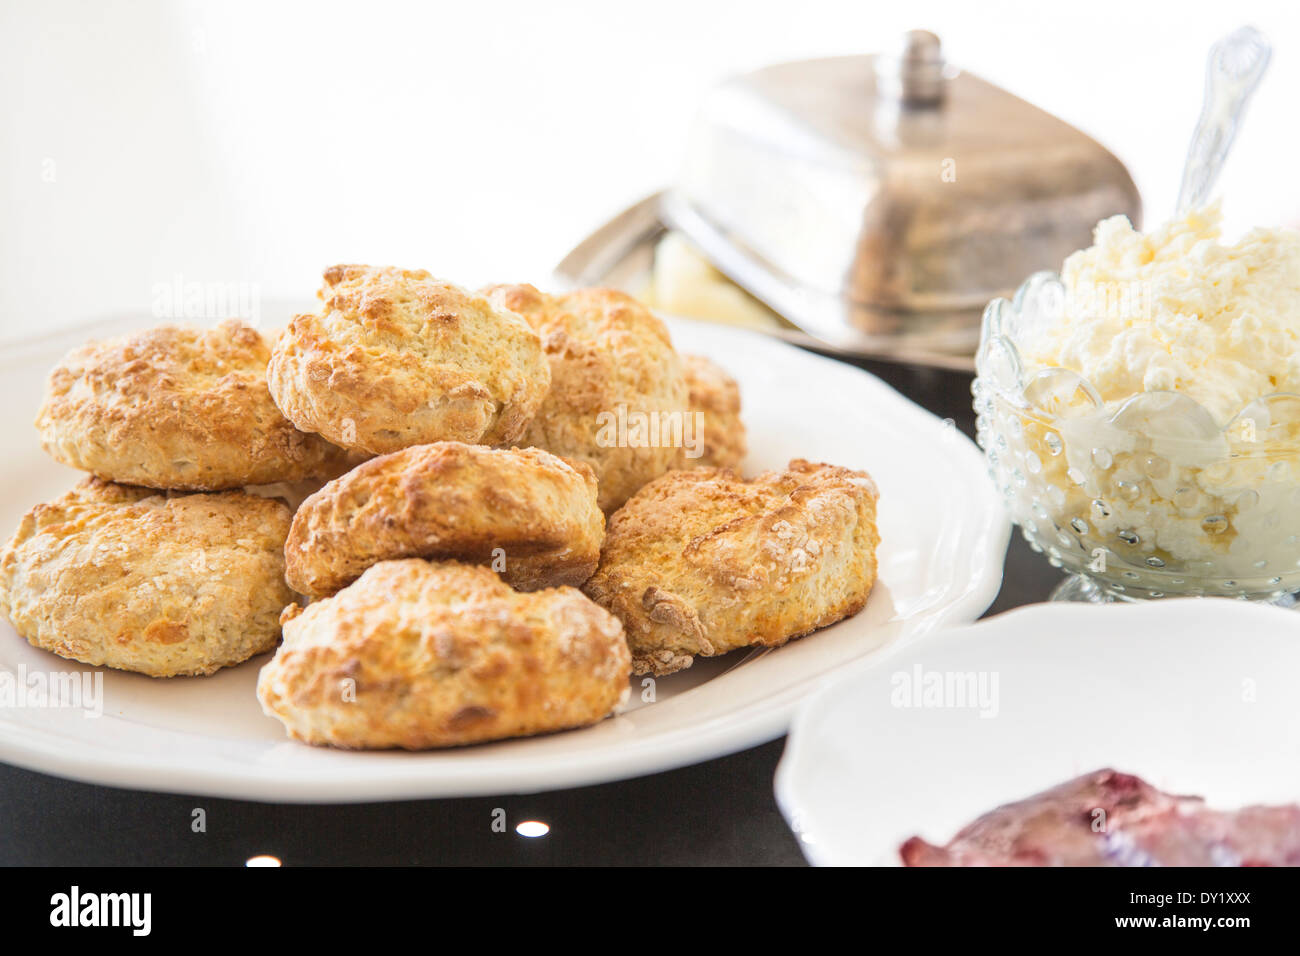 Plate of afternoon homemade scones, served on white plate, with cream and jam, on black metal table. Stock Photo